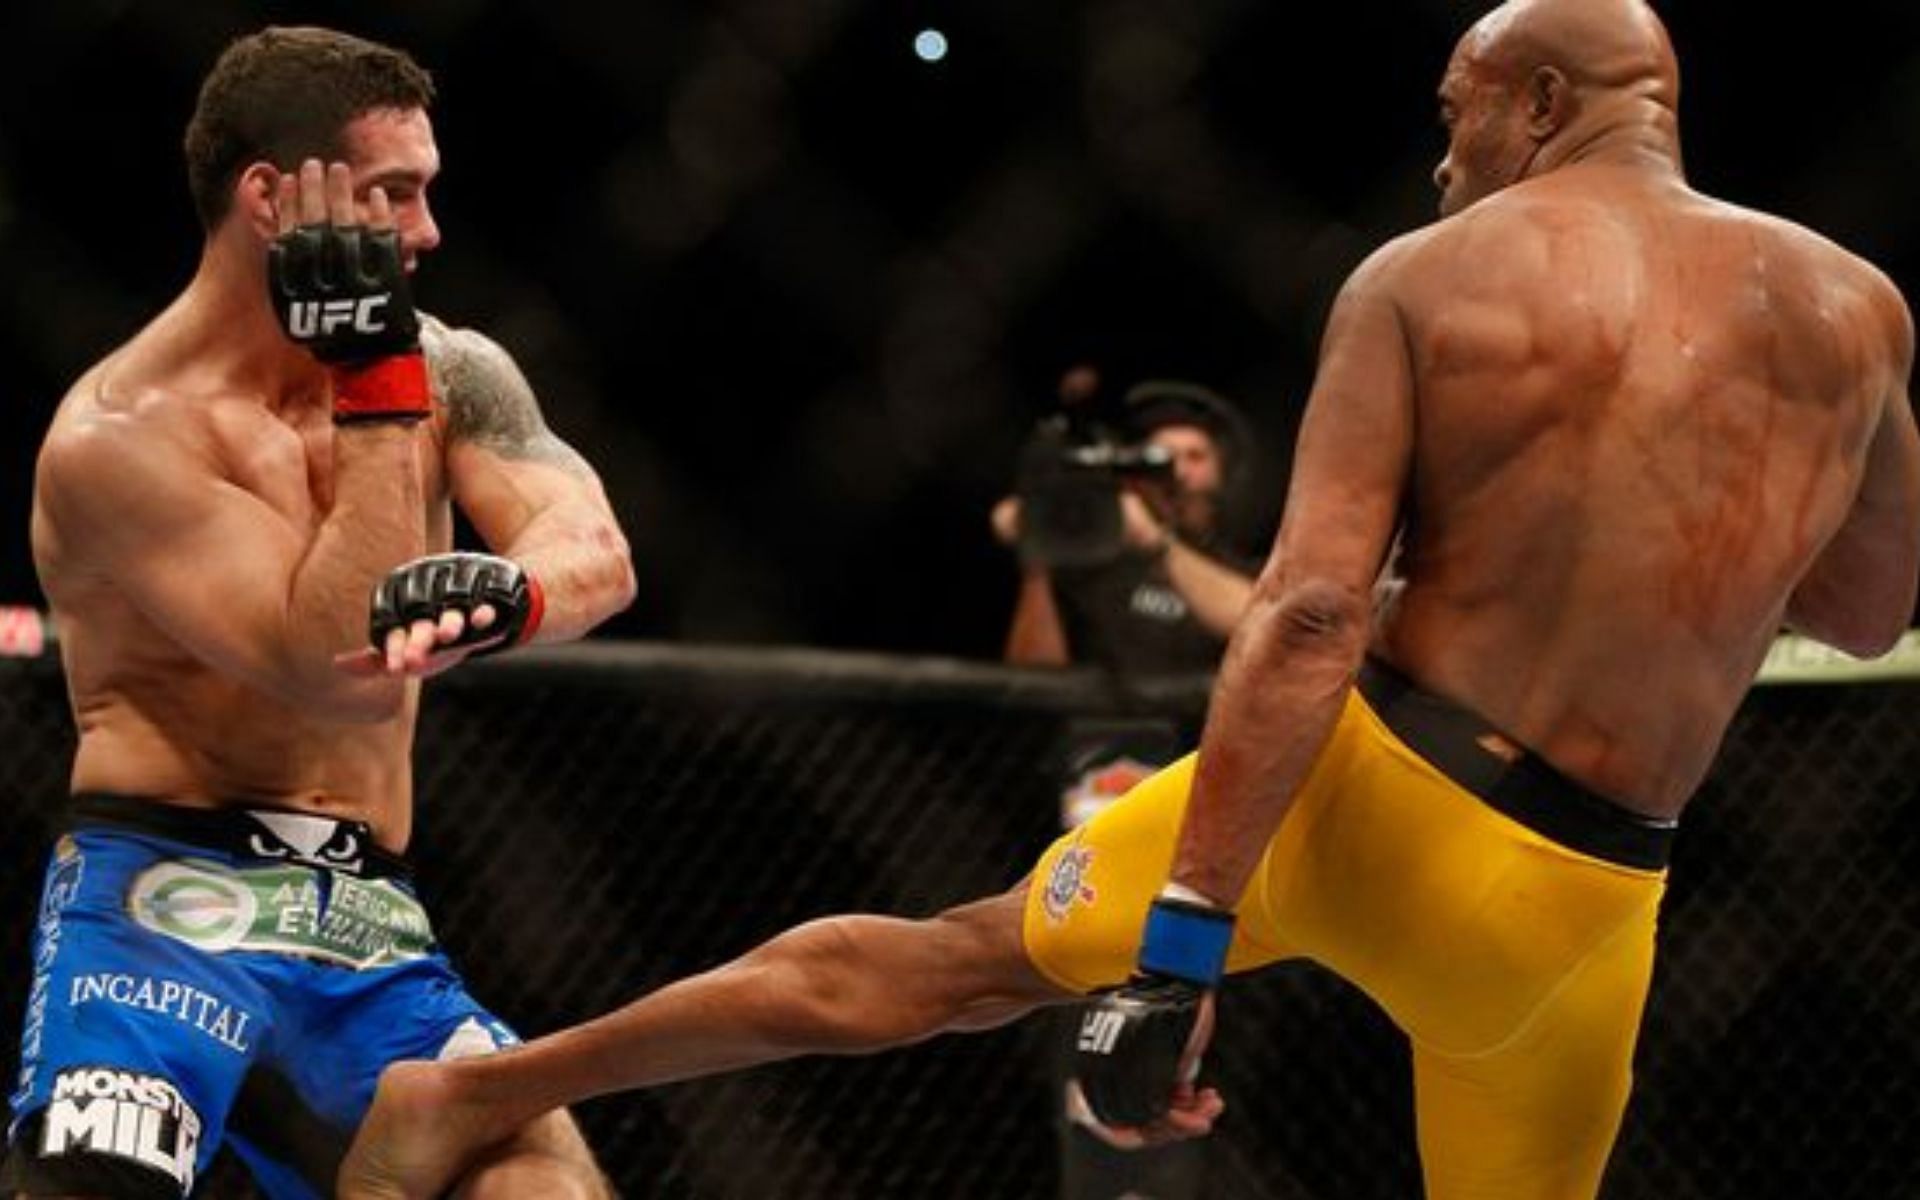 Anderson Silva&#039;s rematch with Chris Weidman ended with a major injury to &#039;The Spider&#039;